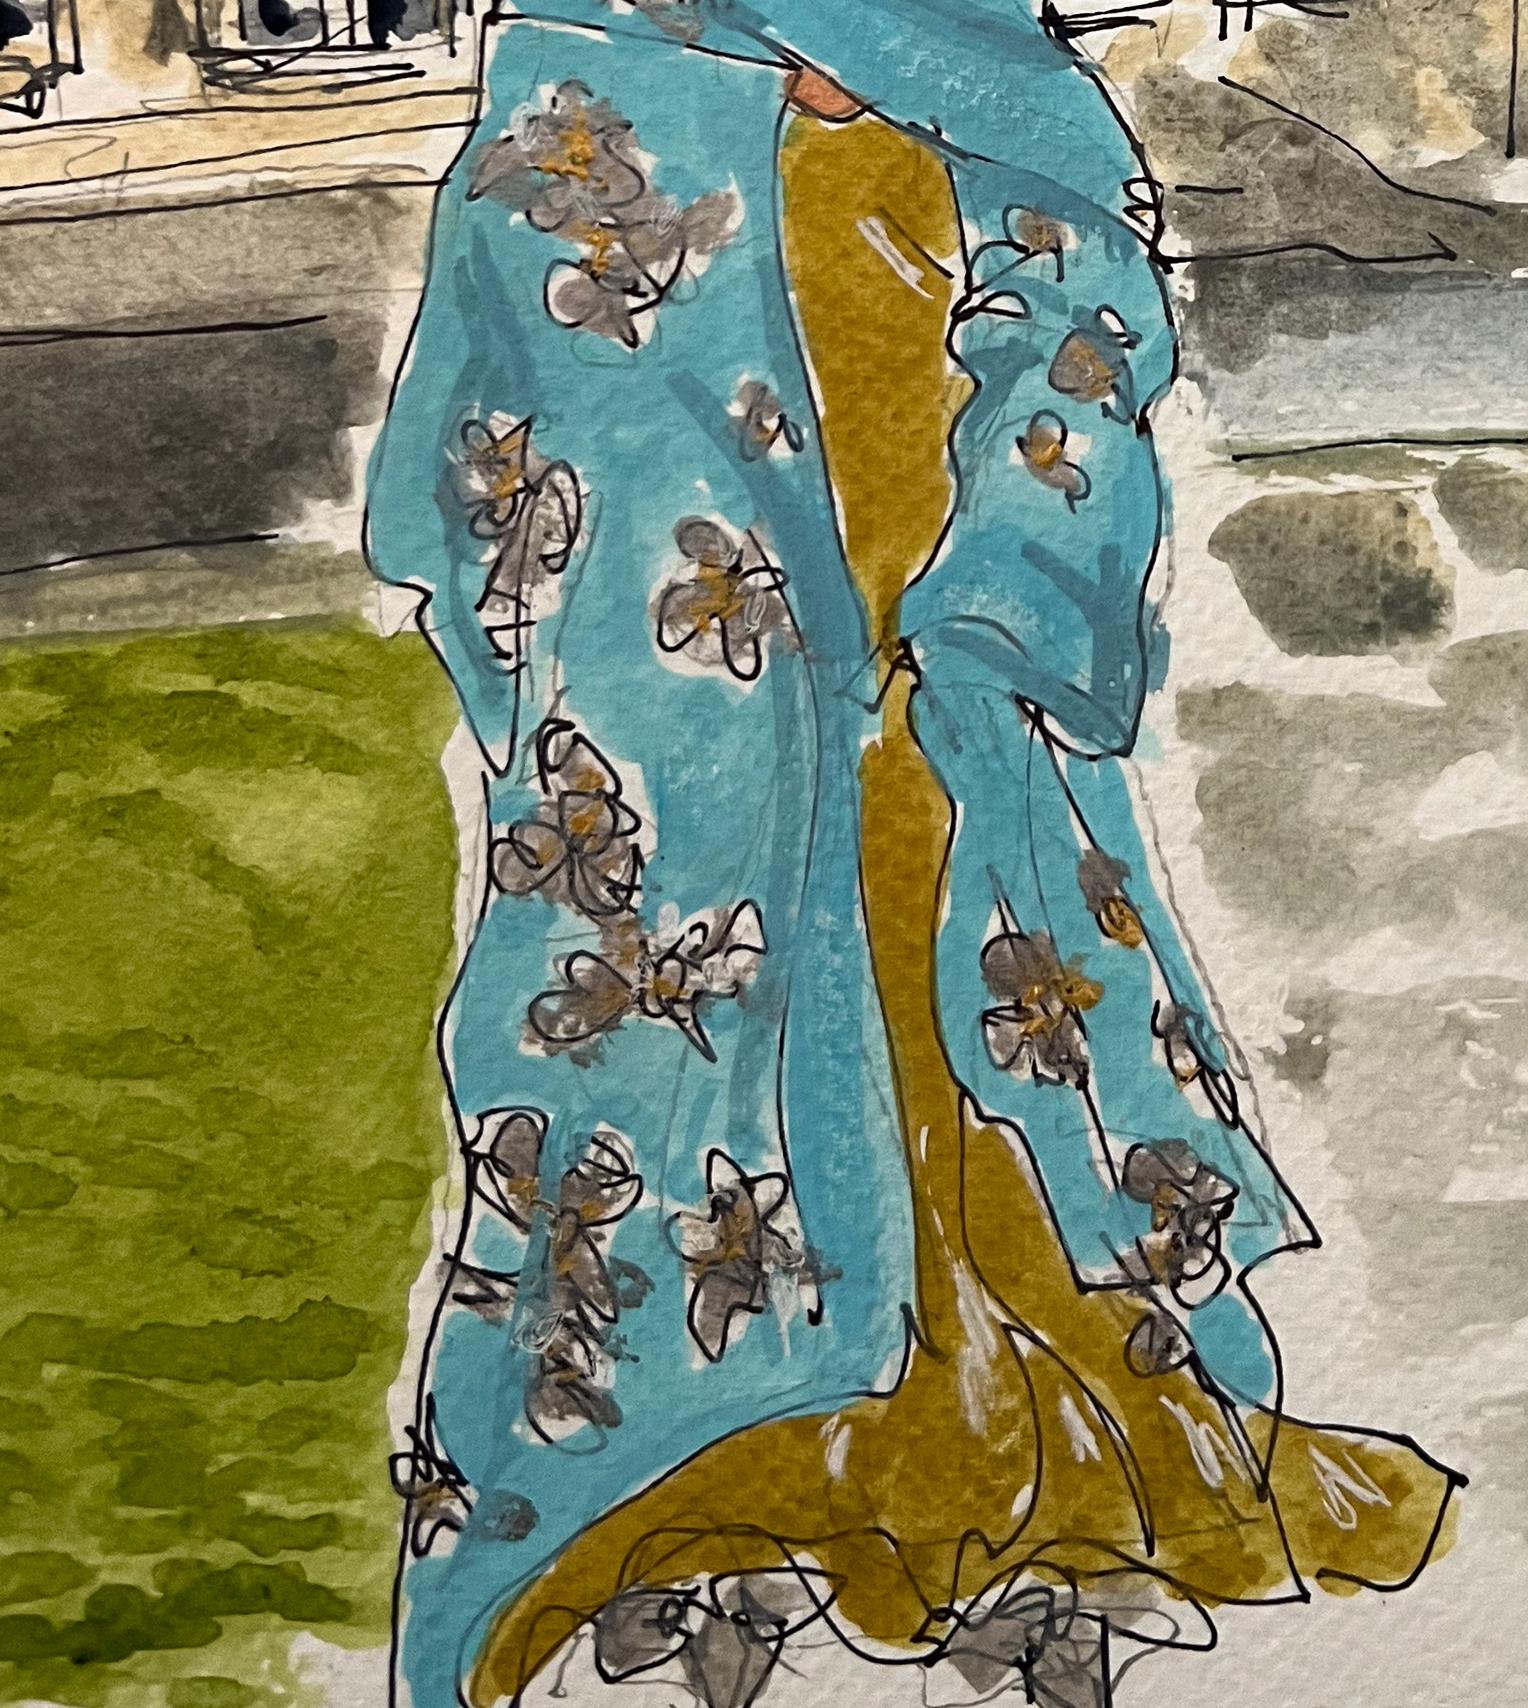 Valentino Haute Couture at Chateau Chantilly, by Manuel Santelices
Ink, gouache, and watercolor on paper.
Image size: 12 in. H x 9 in. W 
Unframed
2023

The worlds of fashion, society, and pop culture are explored through the illustrations of Manuel